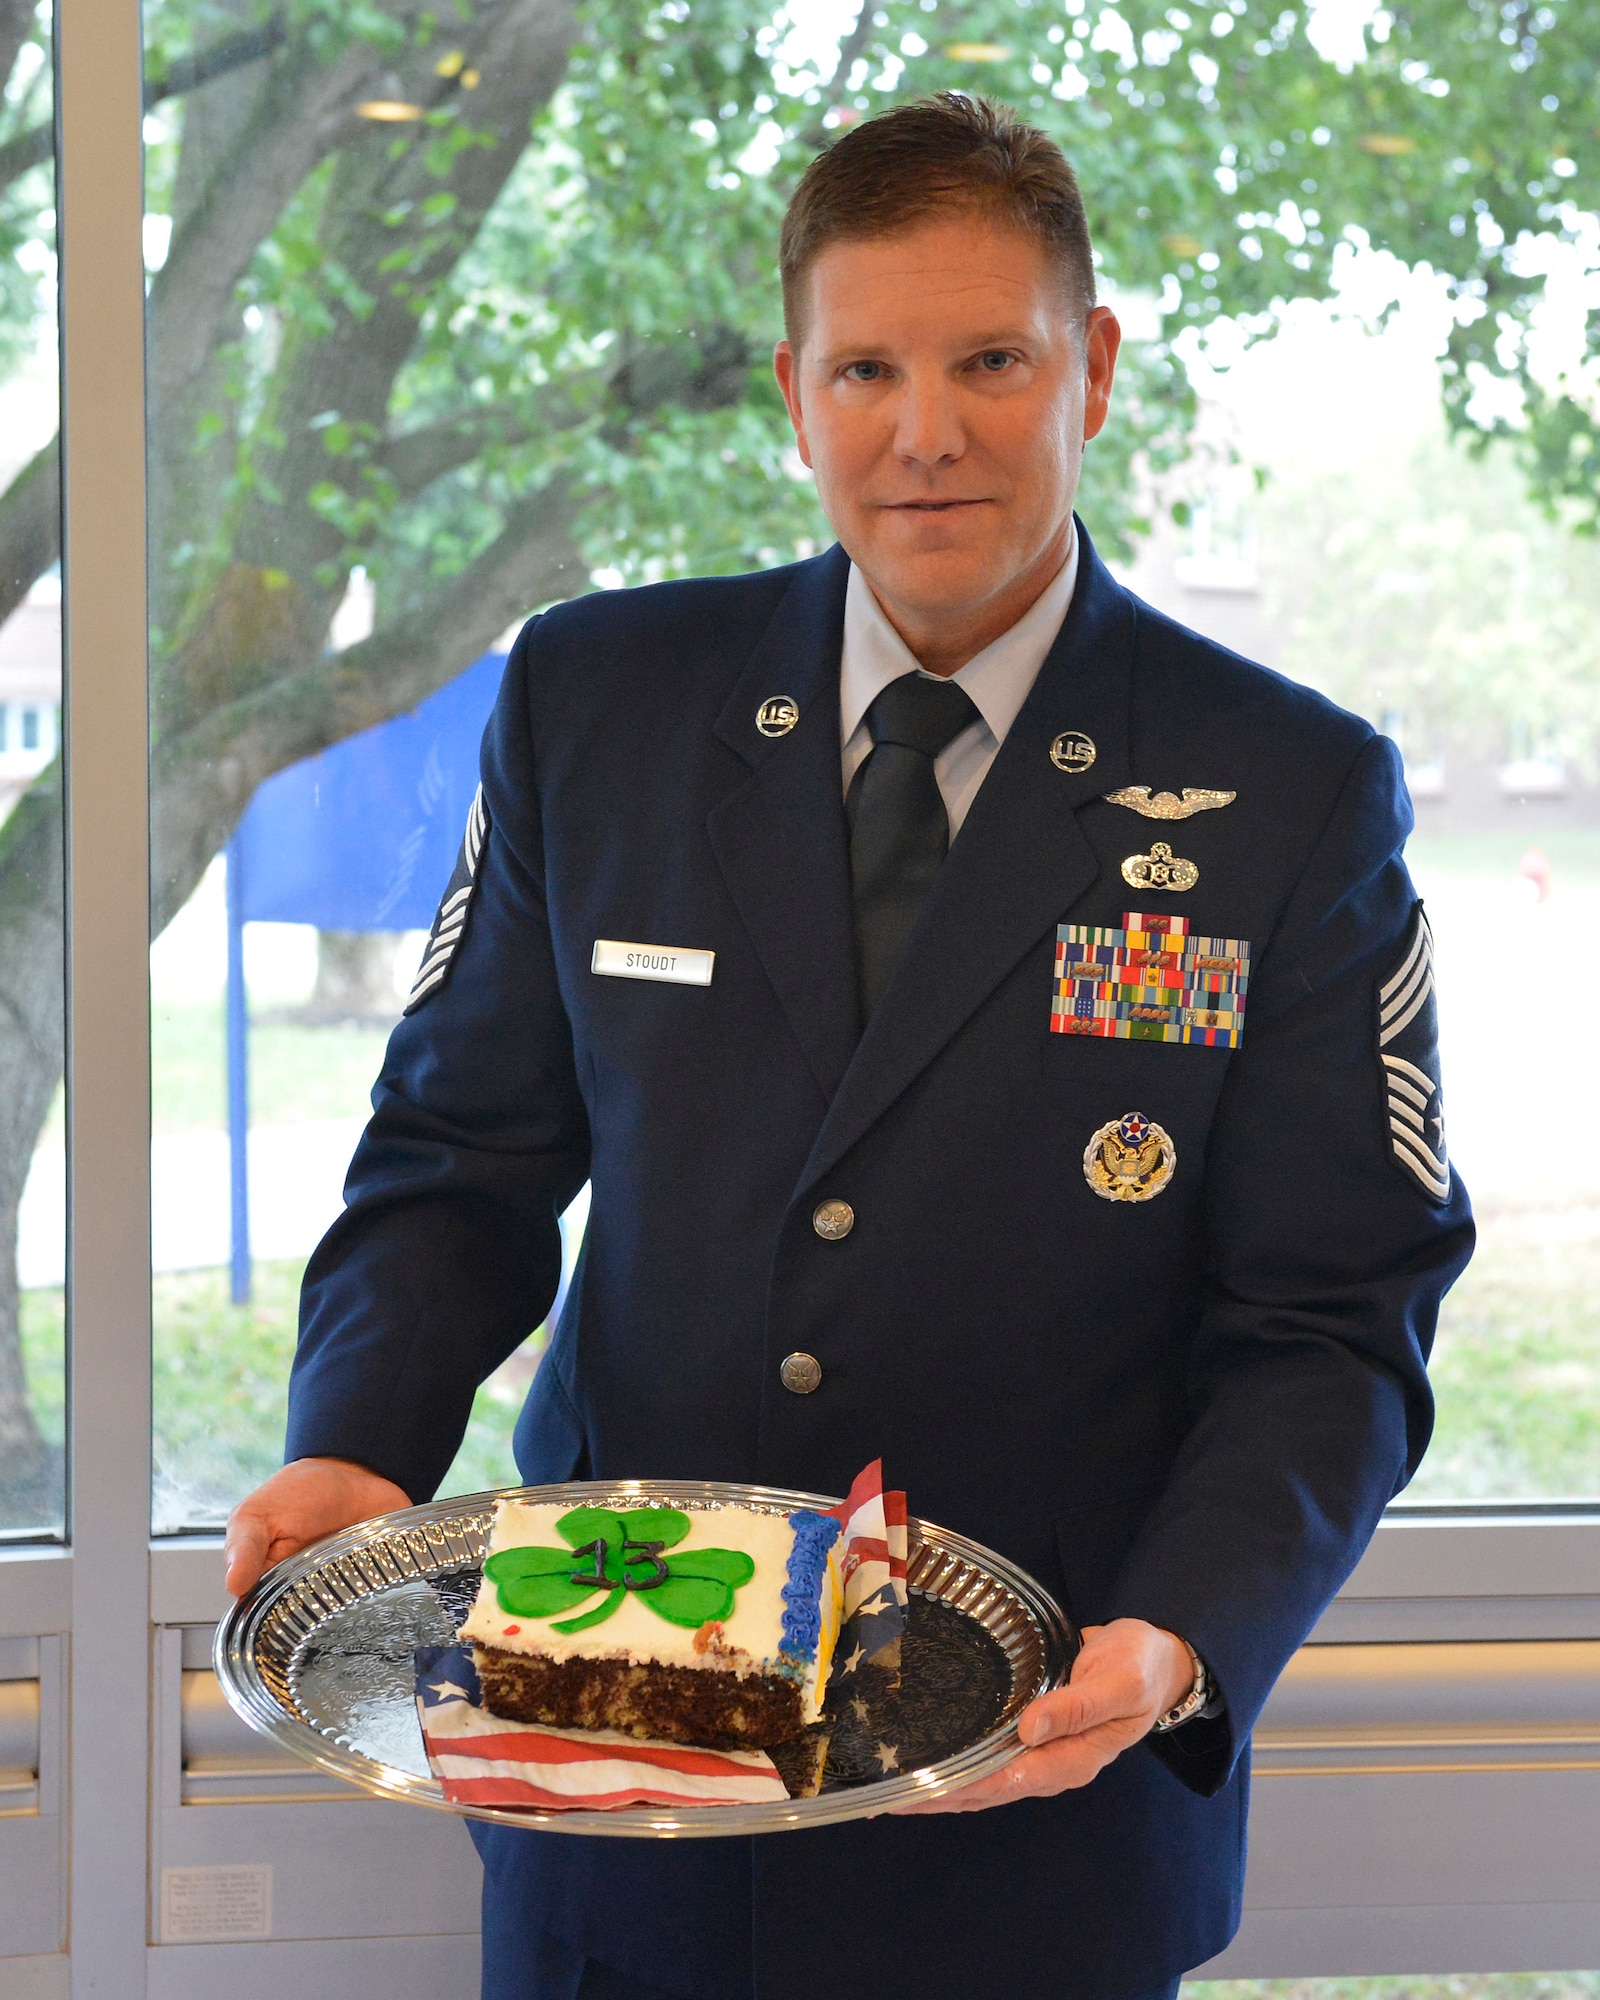 Chief Master Sgt. Thomas K. Stoudt, 13th commandant of the Paul H. Lankford Enlisted Professional Military Education Center here, holds a section of his change of commandant cake Oct. 17 on the I.G. Brown Training and Education Center campus at Spruance Hall. (U.S. Air National Guard photo by Master Sgt. Kurt Skoglund/Released)